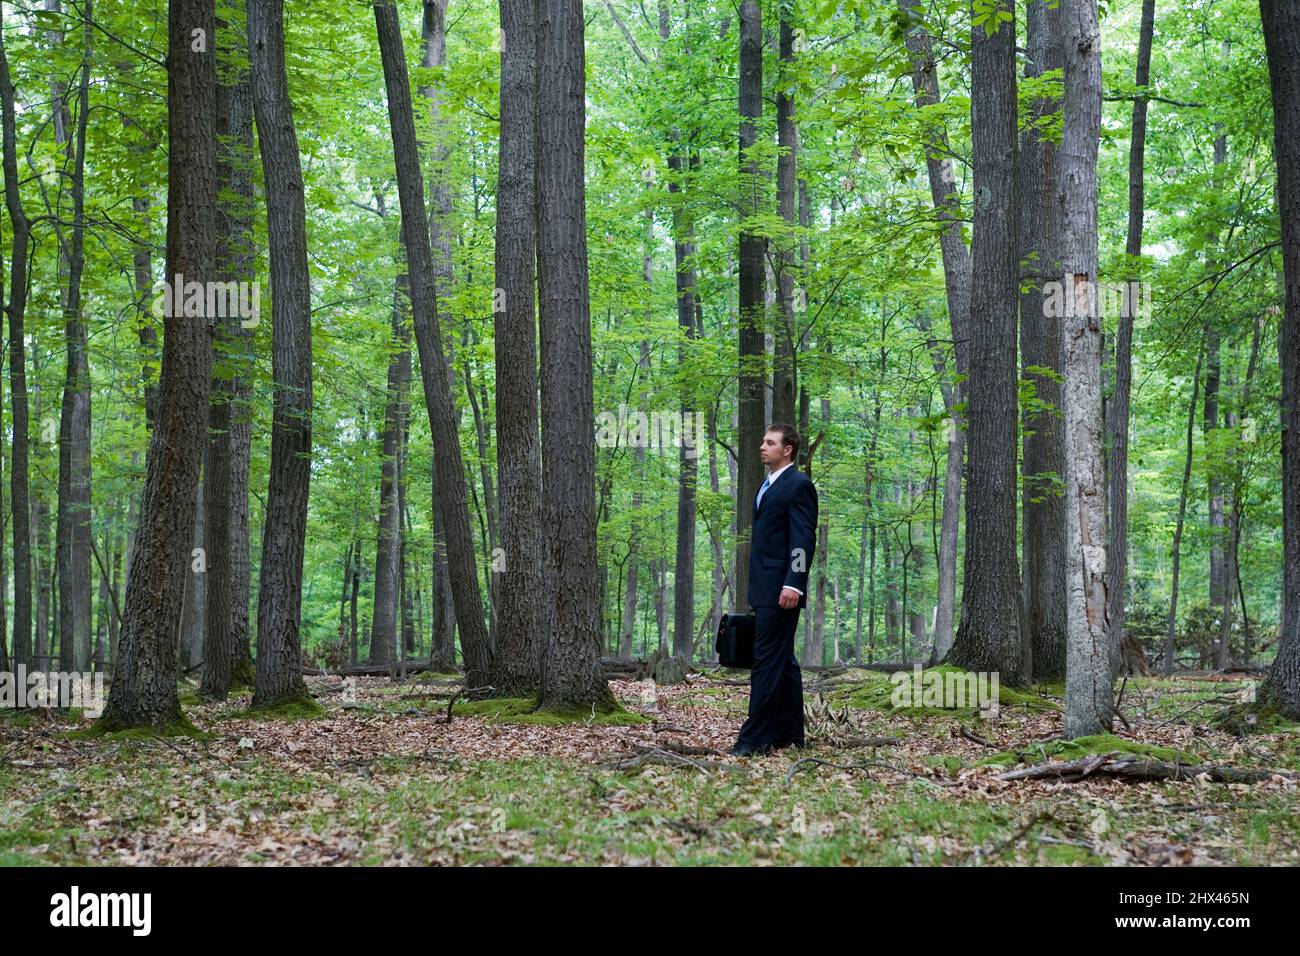 PORTRAIT OF YOUNG BUSINESSMAN WITH BRIEFCASE IN TEMPERATE MIXED NORTHERN FOREST Stock Photo